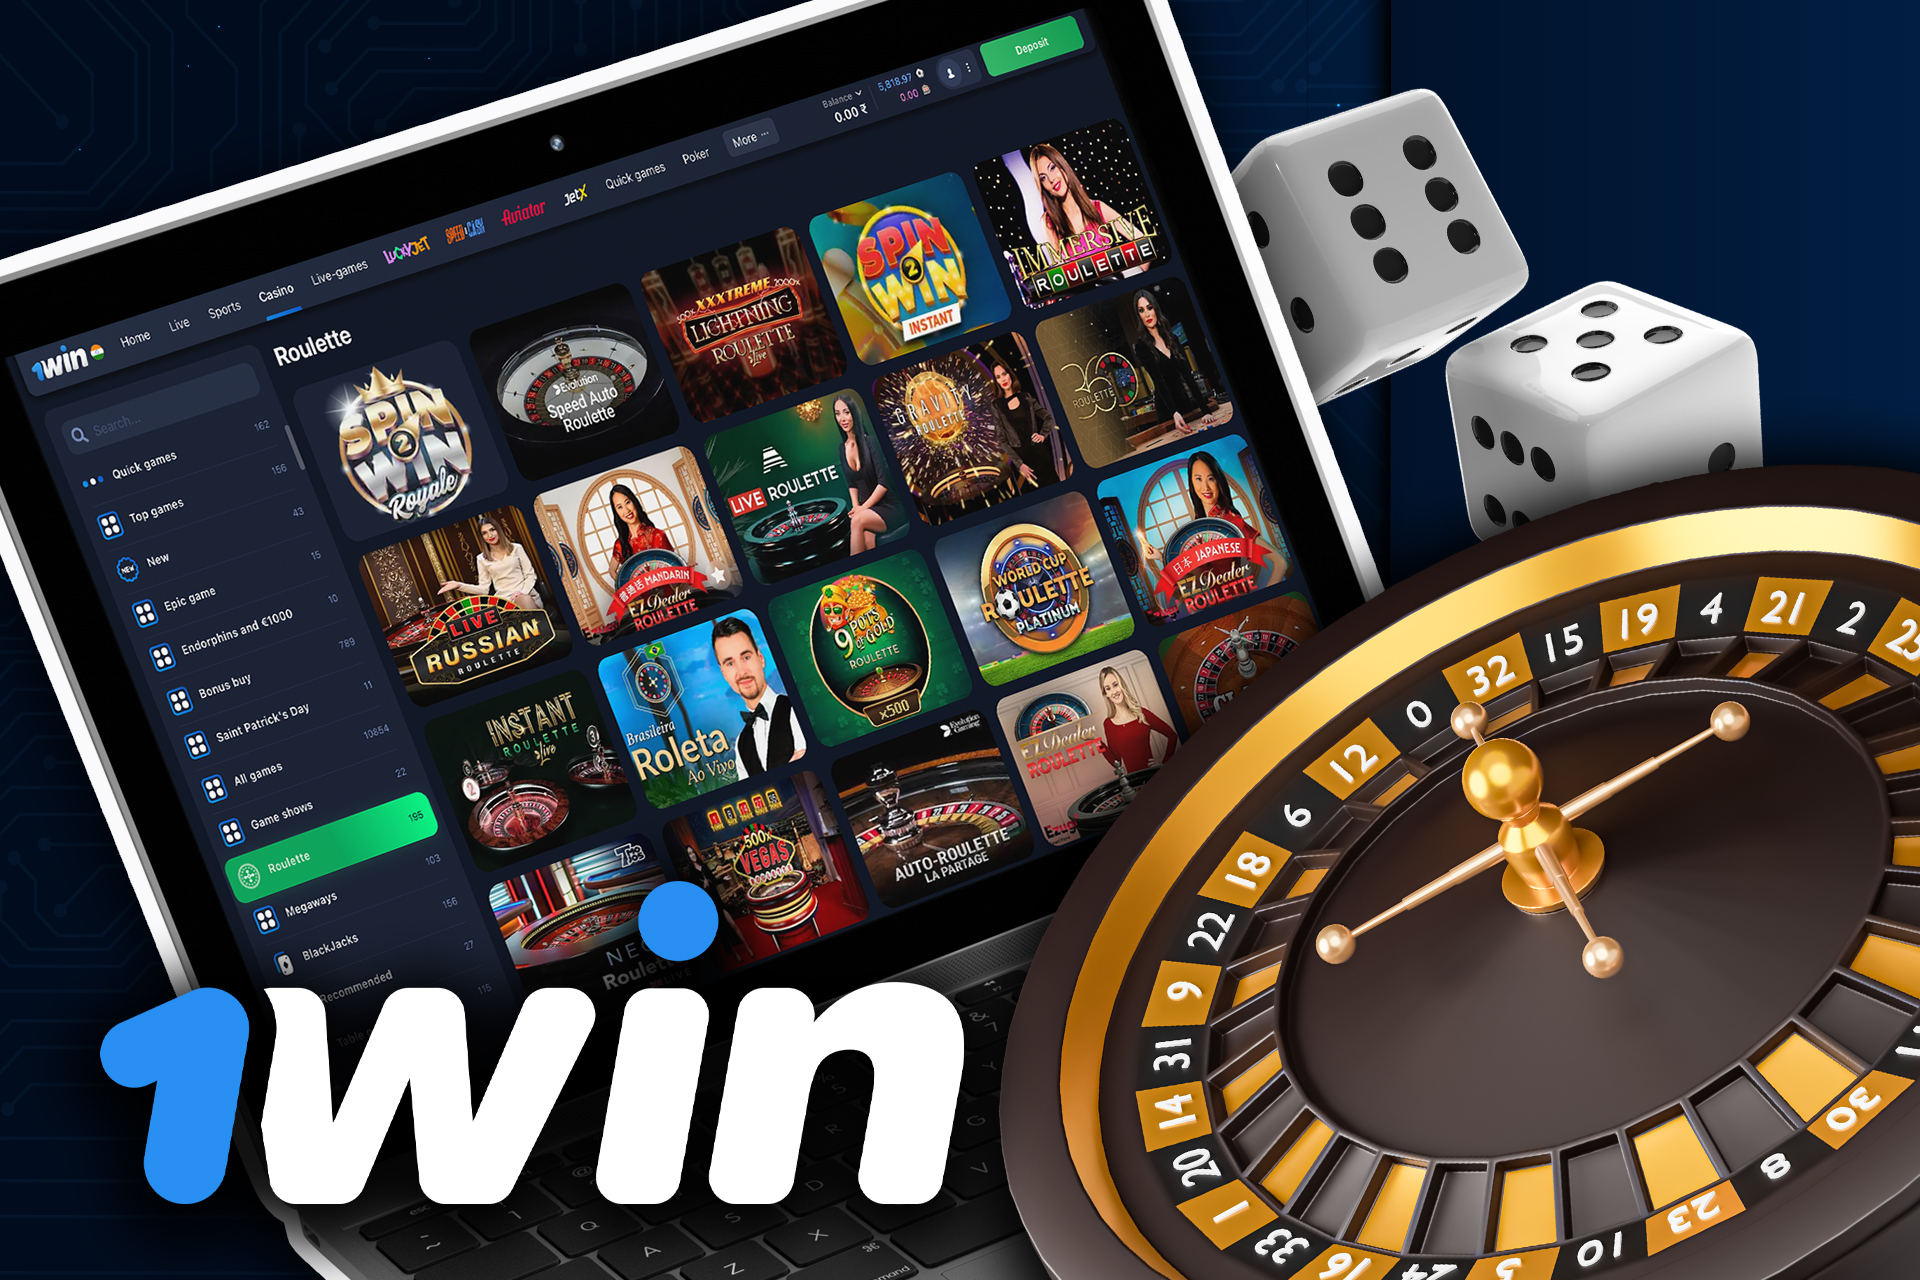 Play the most traditional casino game on 1win - roulette.